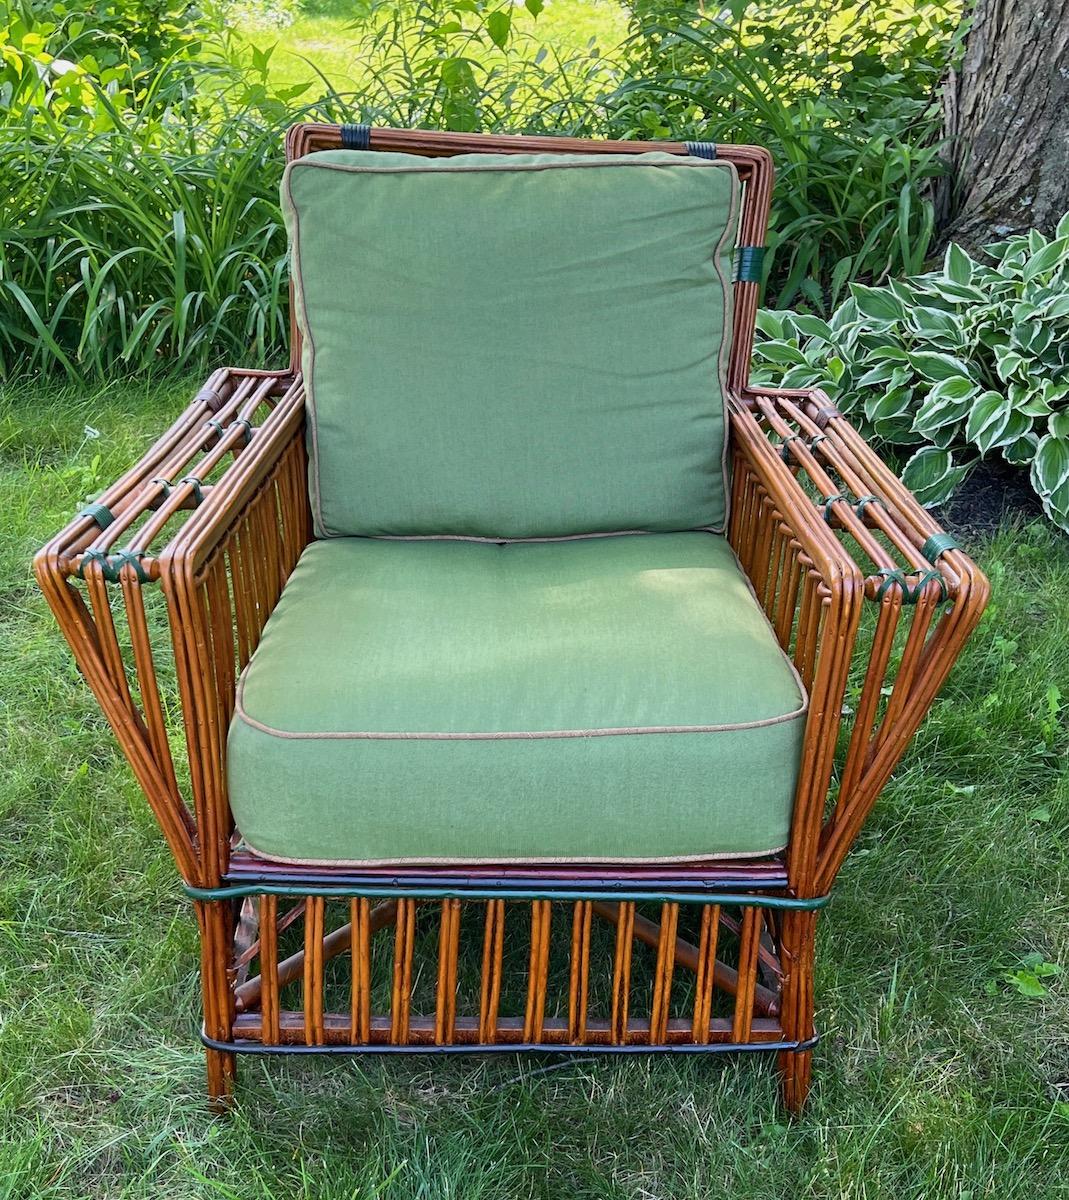 An Antique,handsome and stylish Rattan Arm Chair in natural finish with colored trim, American,C. 1929. This style of furniture was also often called stick wicker or split reed. Modernist stick wicker was all the rage at this point, consumers tastes